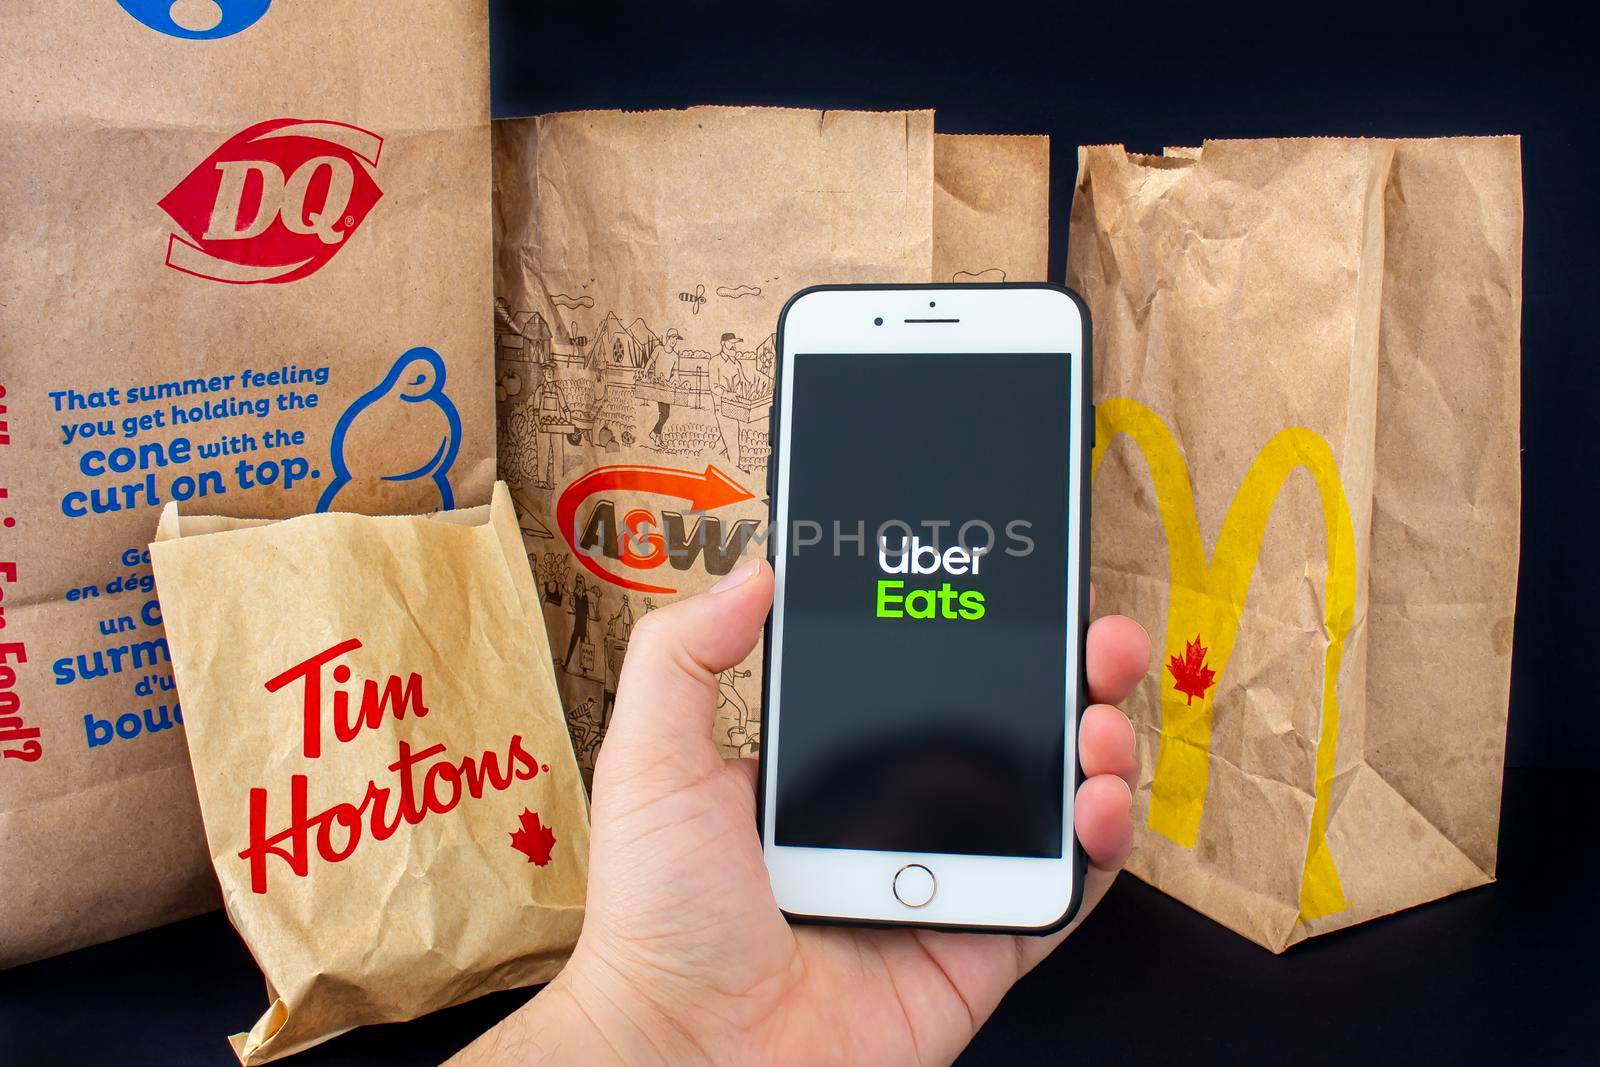 Calgary, Alberta. Canada. April 24, 2020: A person holding an iPhone Plus with the Uber Eats application open with delivered food bags from Tim Hourtons, A&W, McDonals and DQ